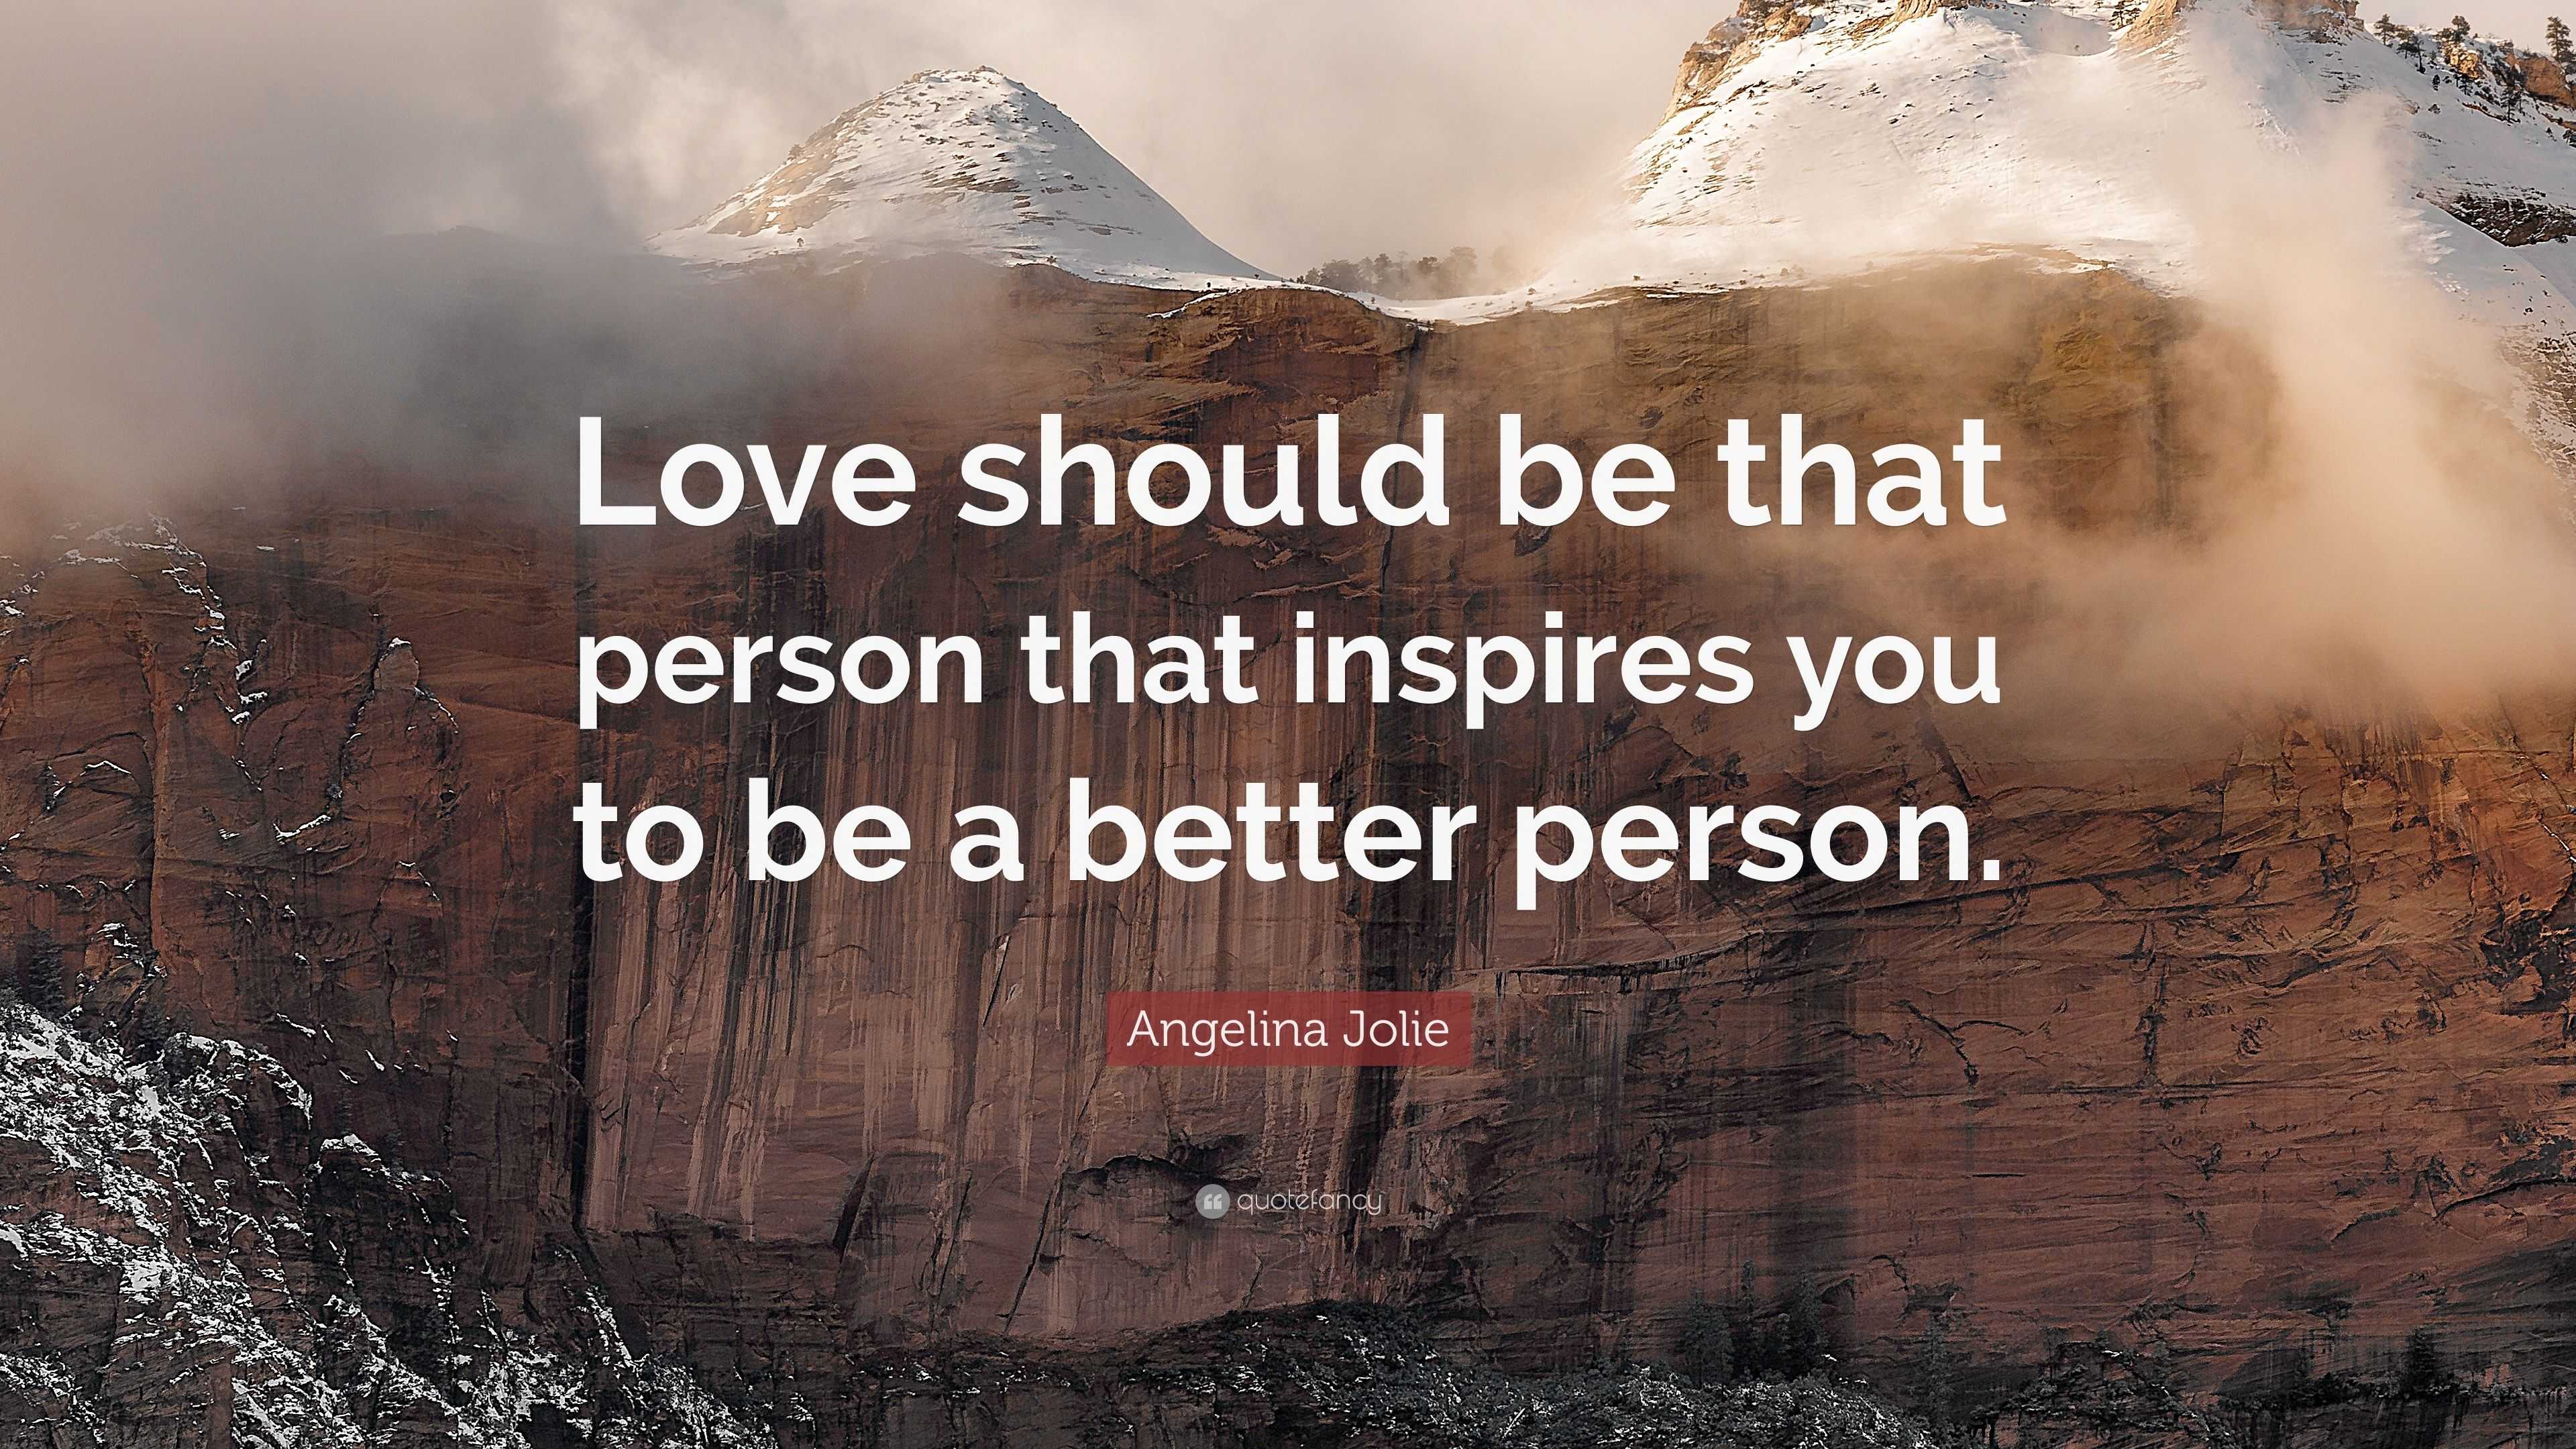 Angelina Jolie Quote: “Love should be that person that inspires you to ...